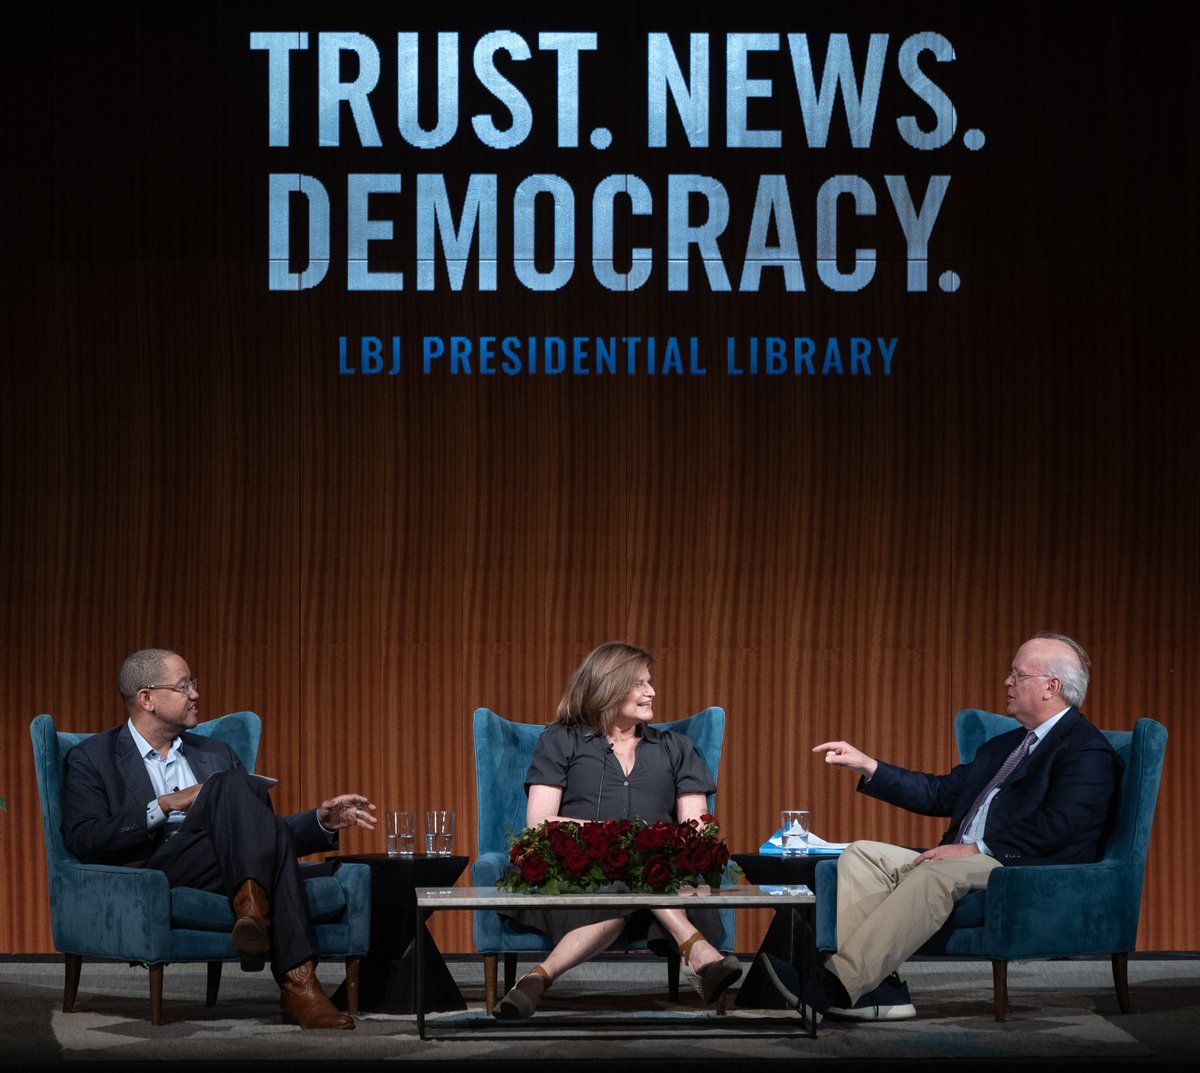 After two full days of insightful, action-packed panel discussions, we finished it off w/ conversations featuring @JudyWoodruff, @KarlRove, & @jmpalmieri. Thanks to everyone who attended! If you missed any sessions, check them out on our YouTube channel: youtube.com/thelbjlibrary